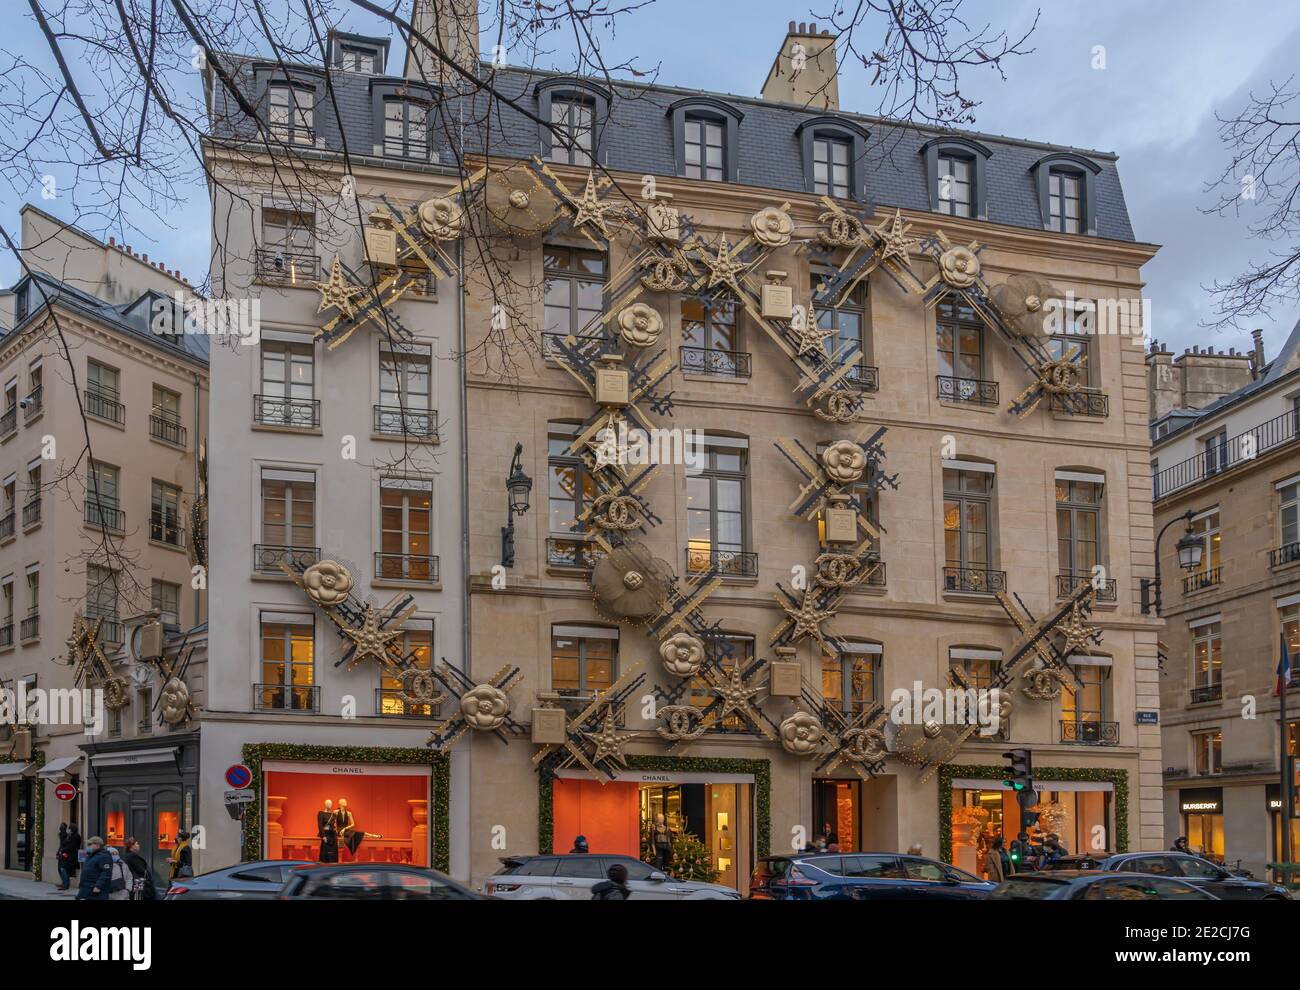 Paris, France - 12 30 2020: View of Chanel perfumes store at